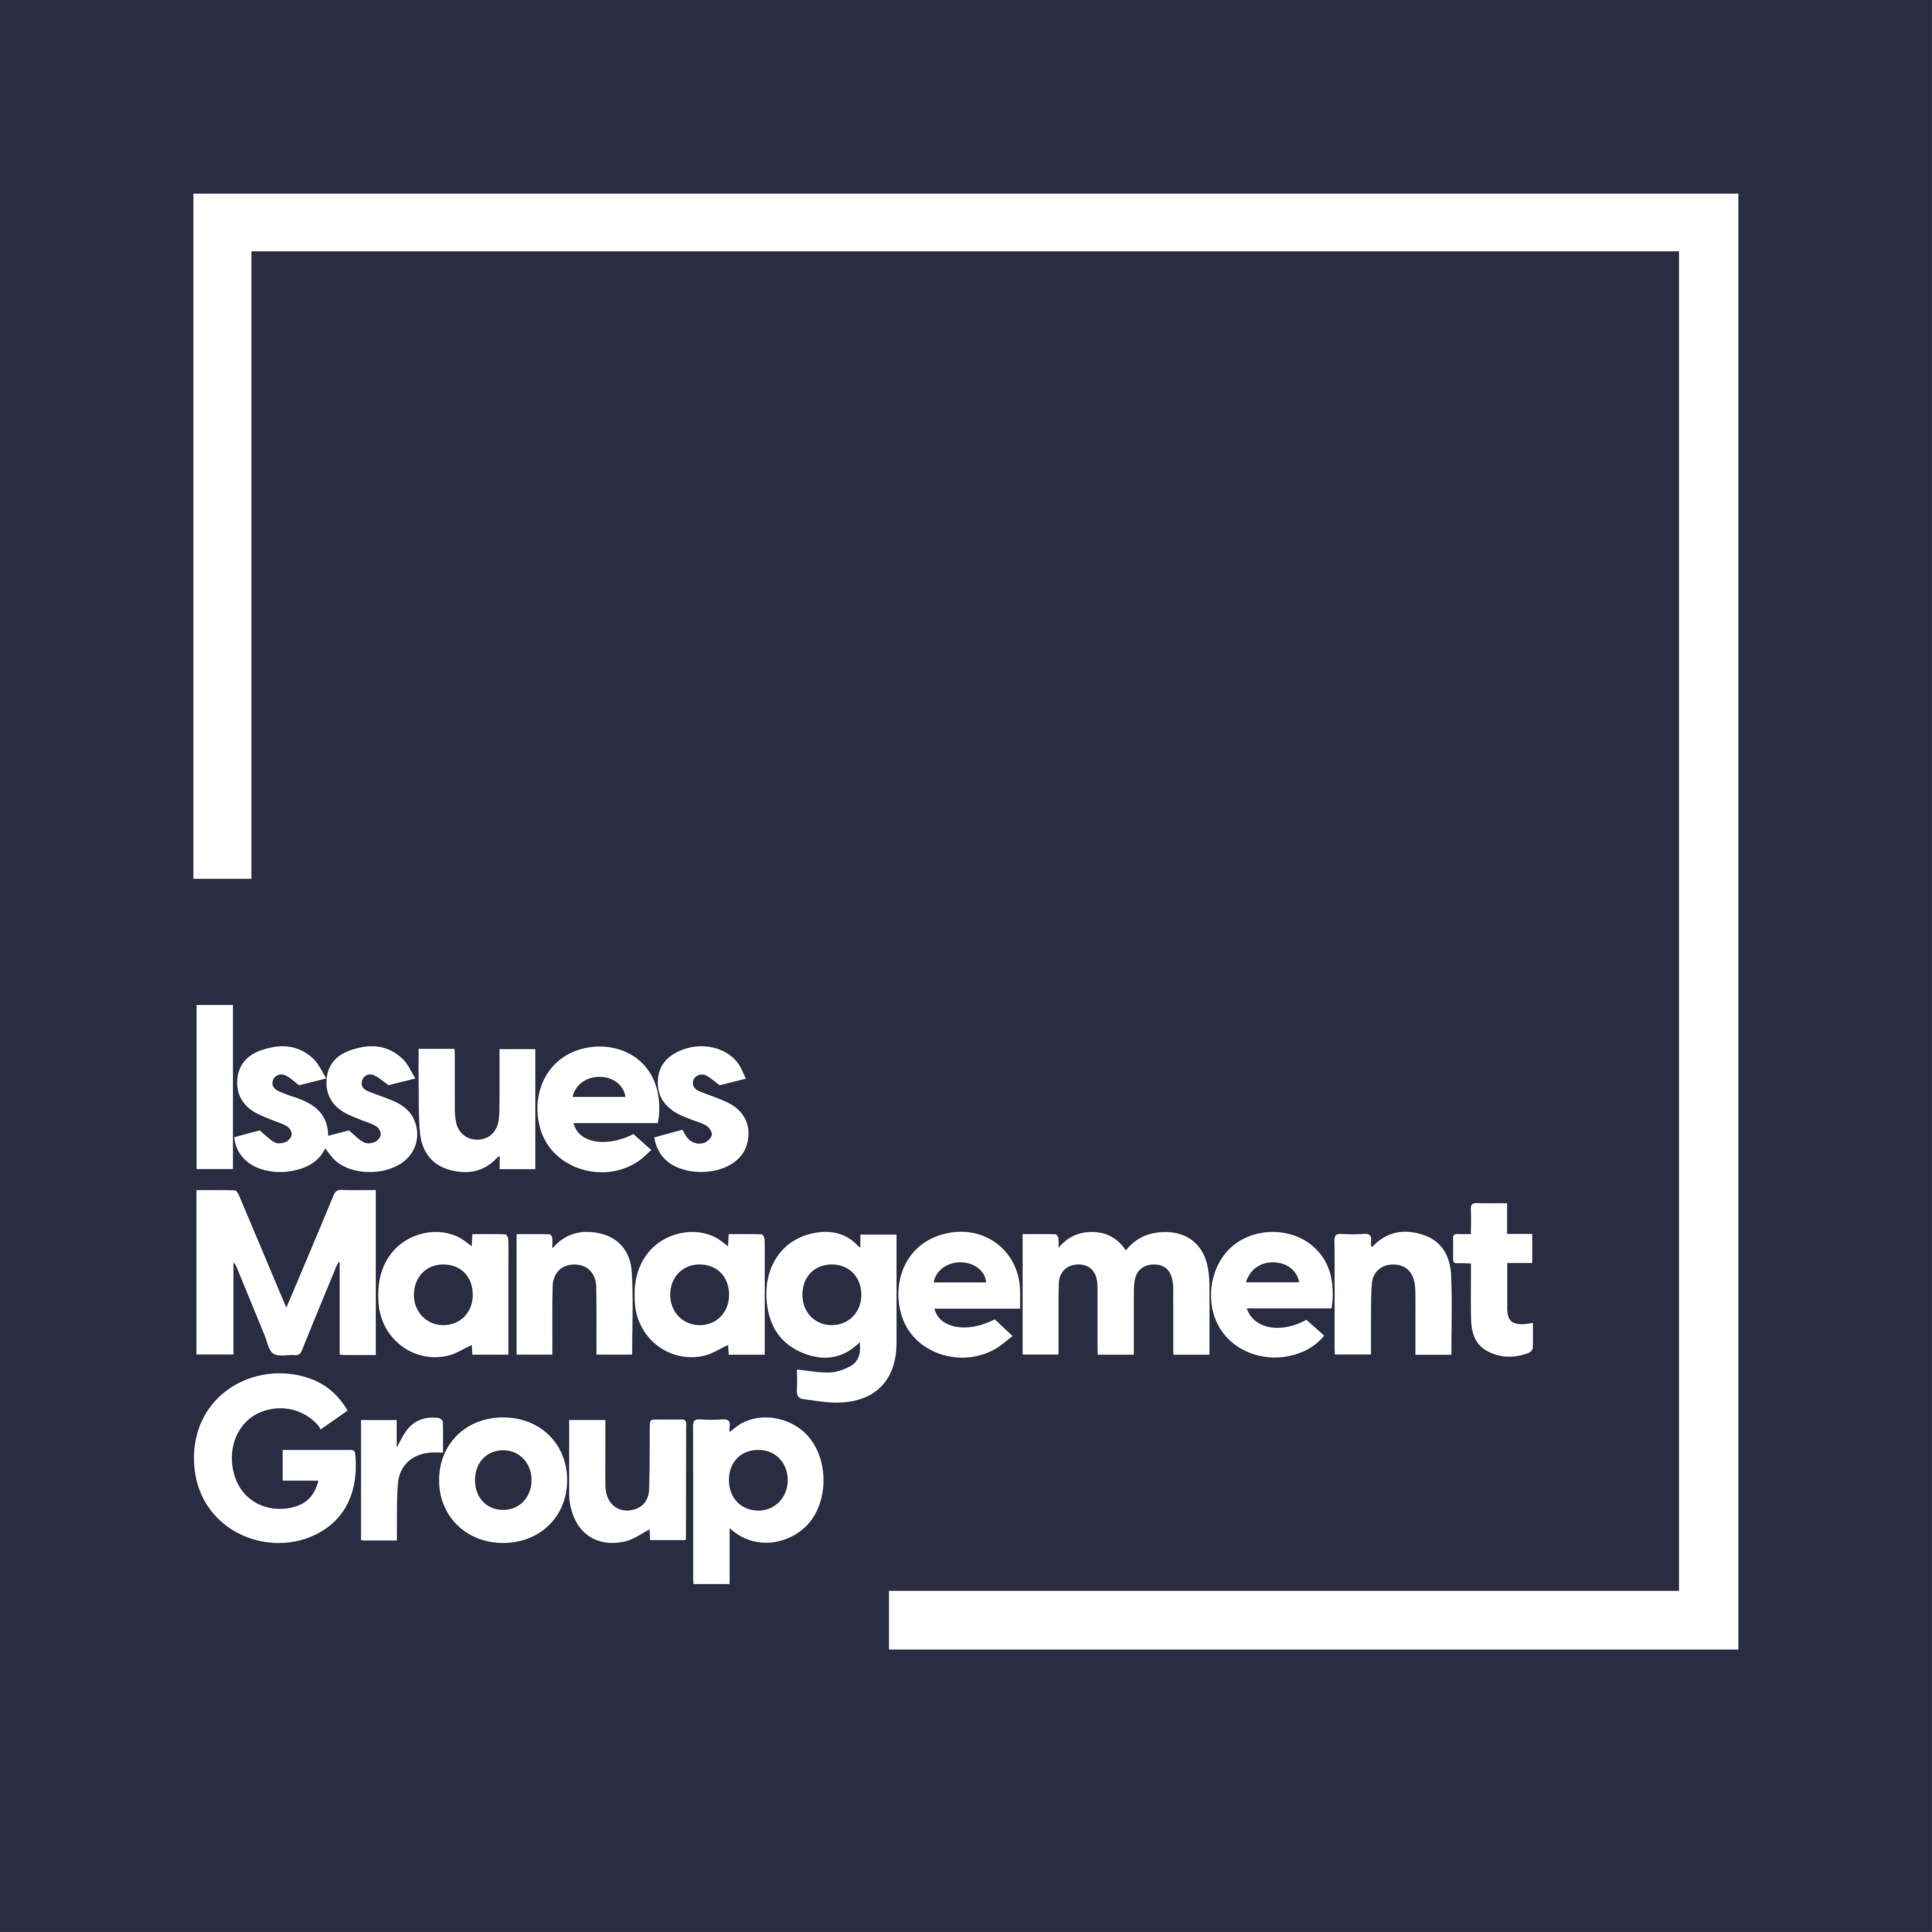 Issues Management Group